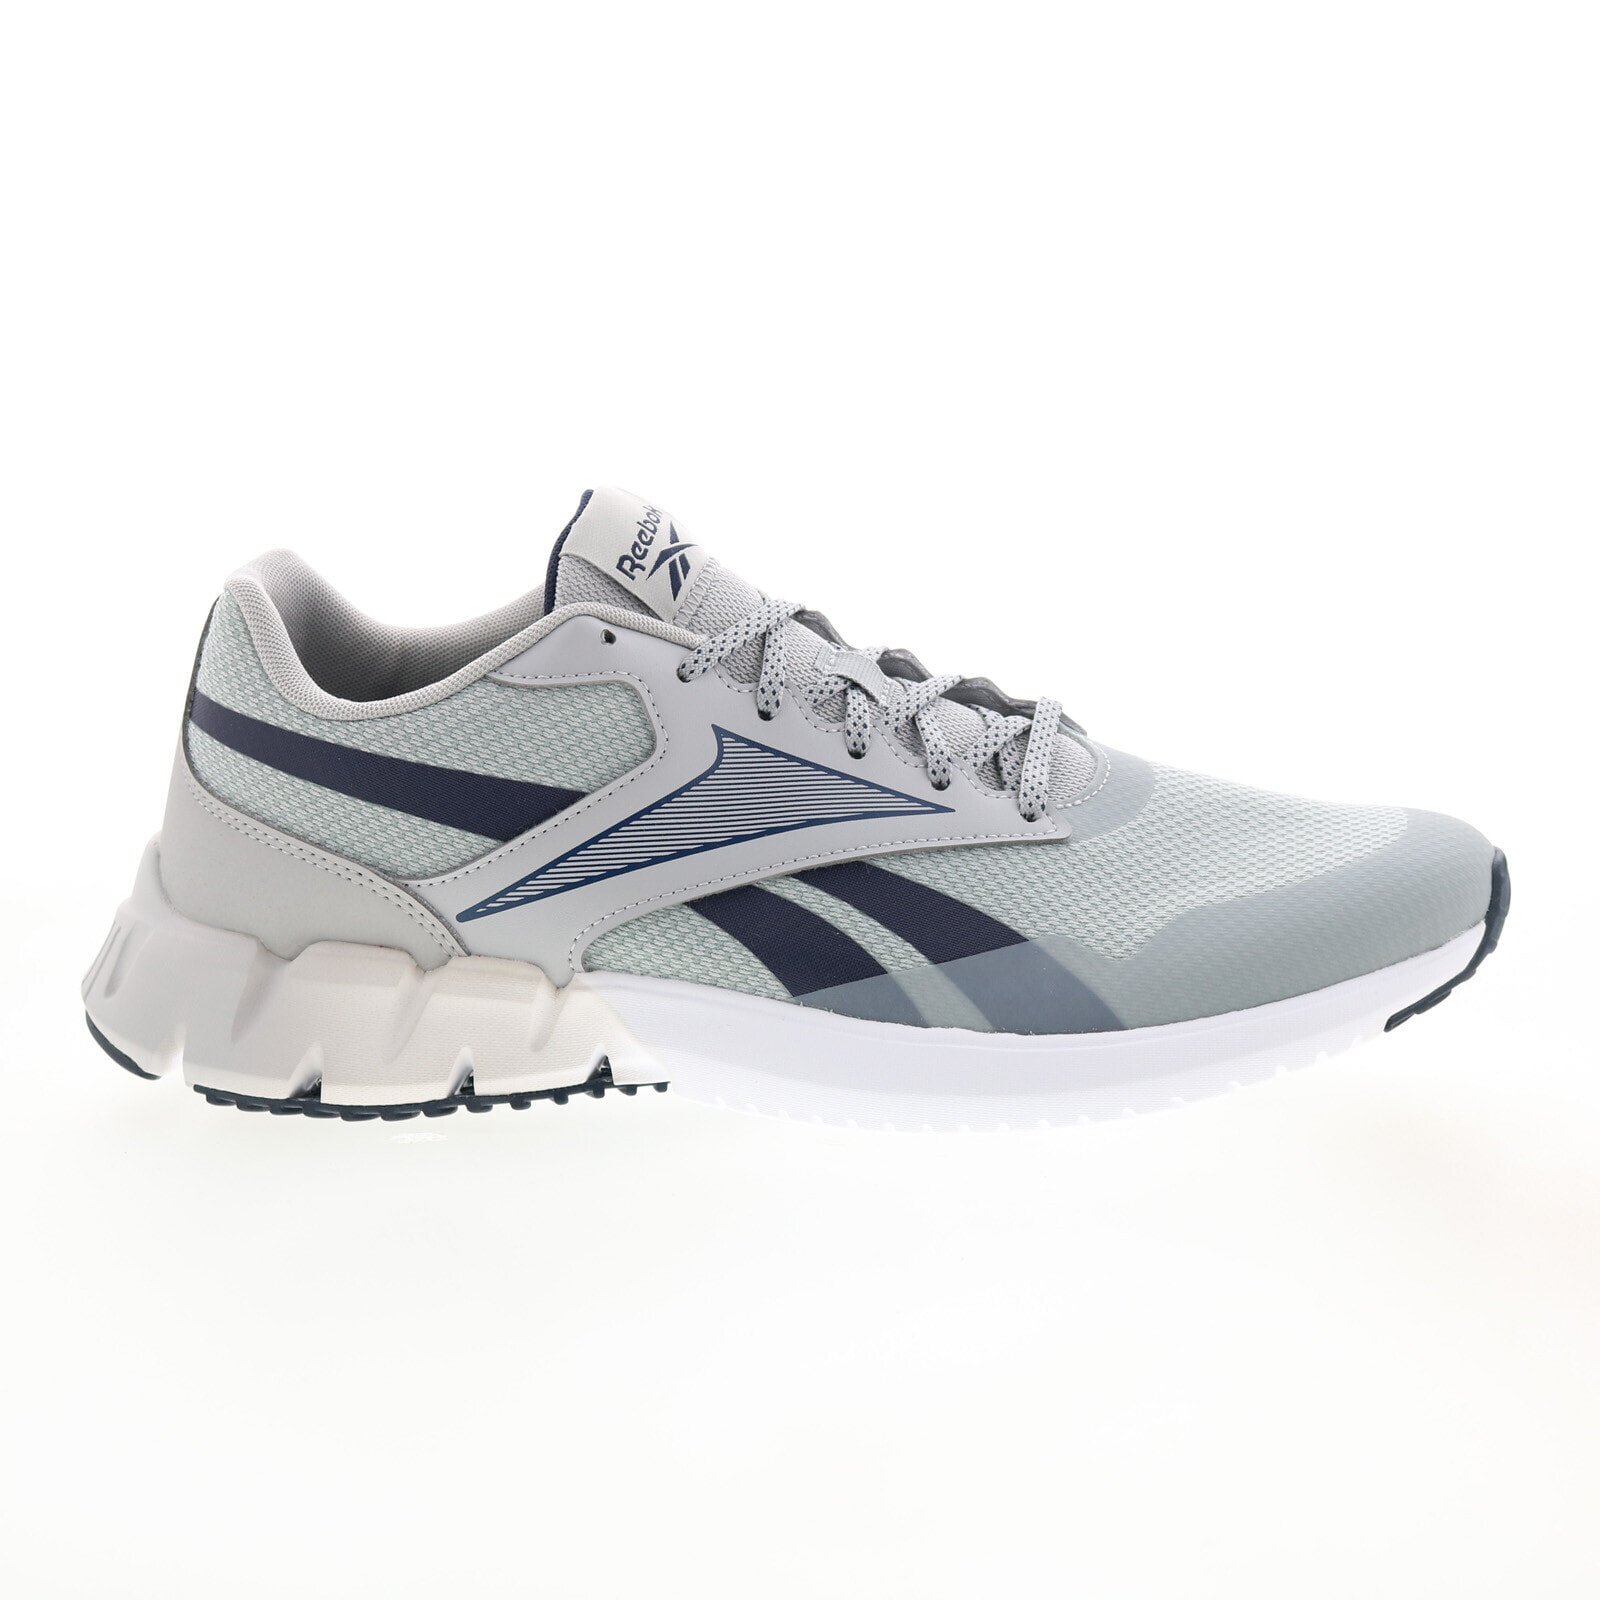 Reebok Ztaur Run GY7718 Mens Gray Synthetic Lace Up Athletic Running Shoes